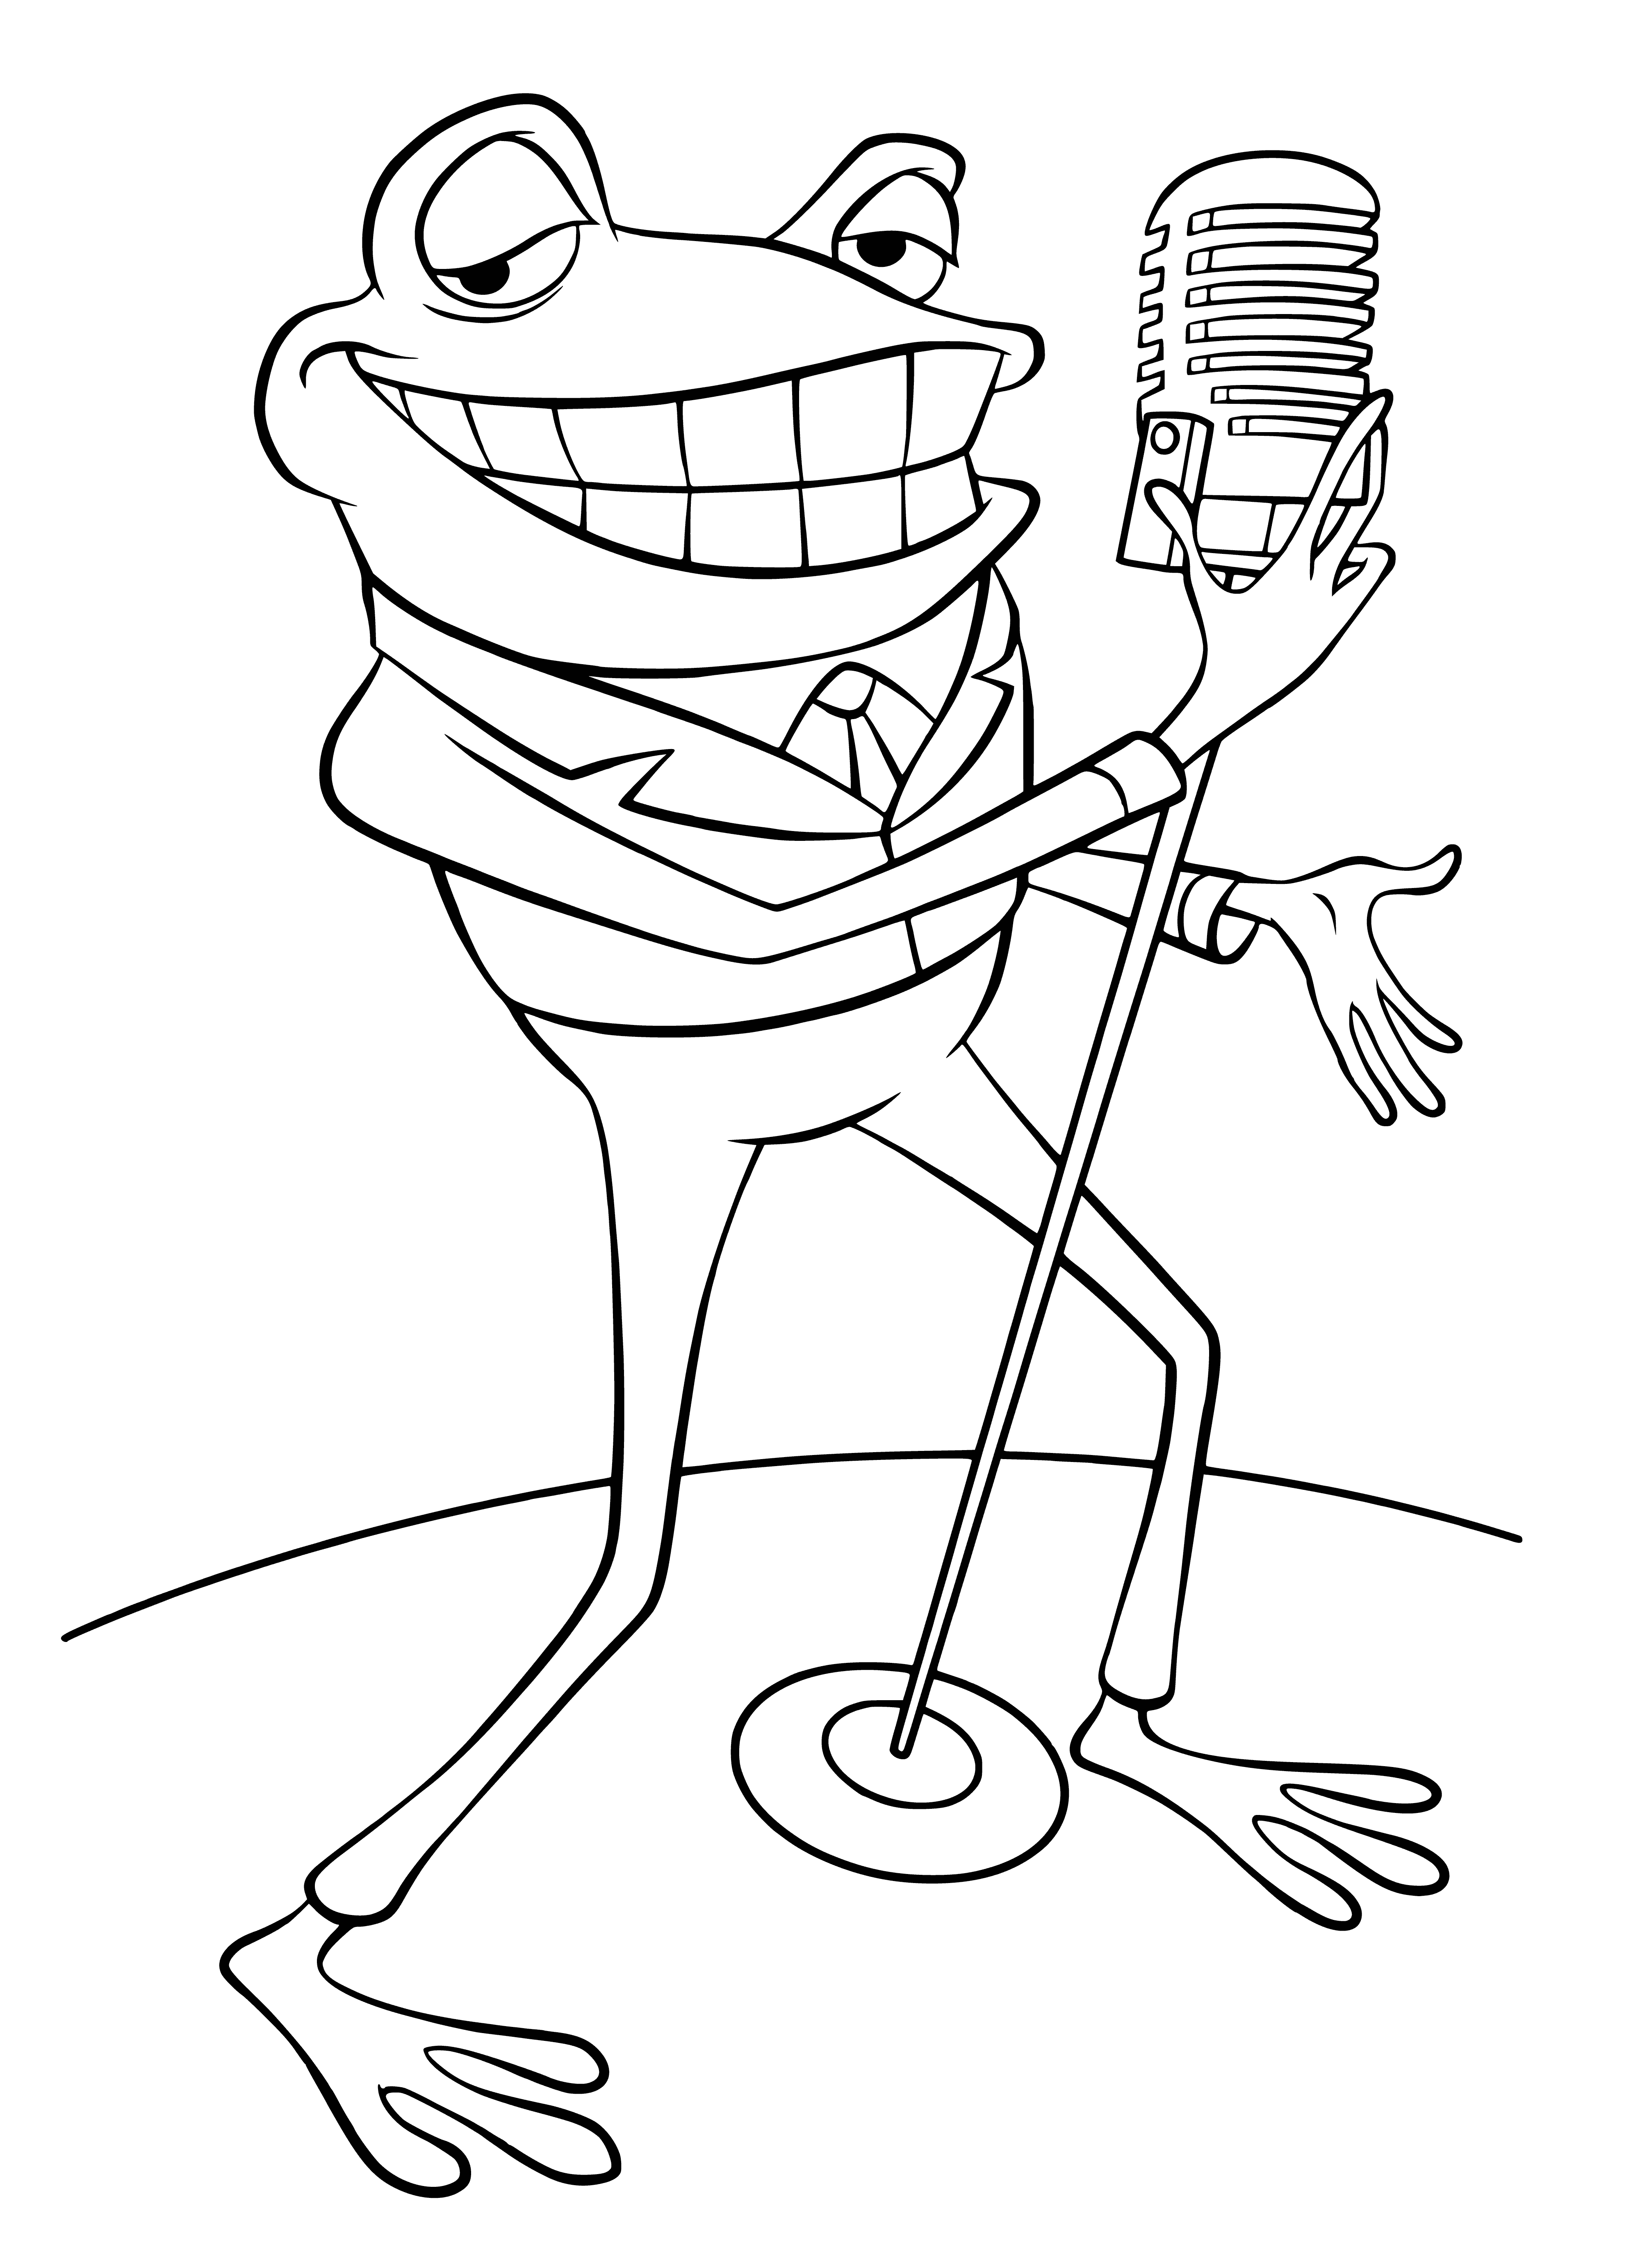 coloring page: A smiling frog and singing bluebird perched on a toadstool surrounded by a coloring pagesque country scene.